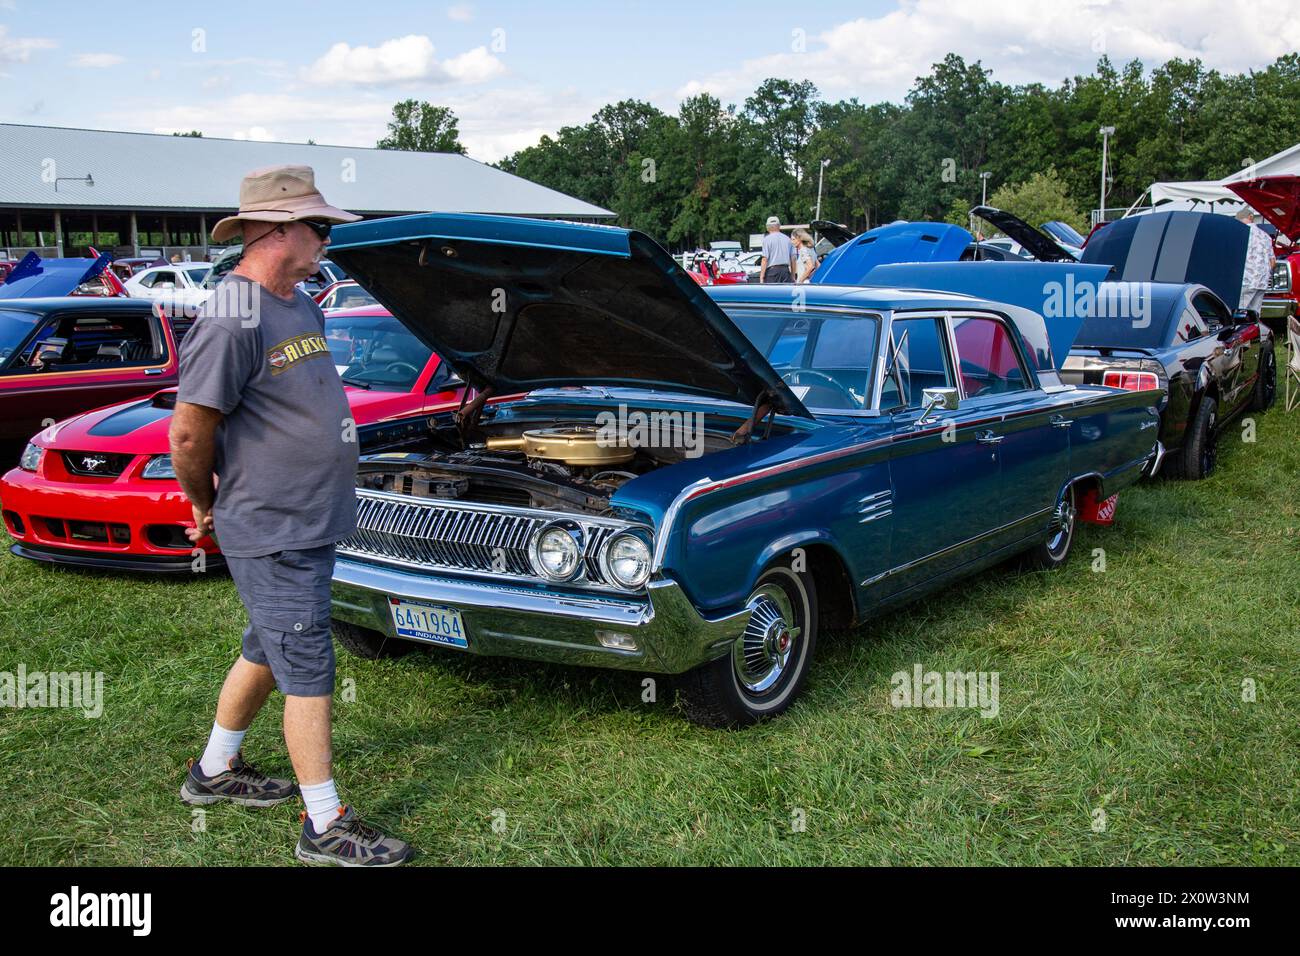 A man walks past a blue 1964 Mercury Monterey sedan on display in a car show at the Allen County Fairgrounds in Fort Wayne, Indiana, USA. Stock Photo